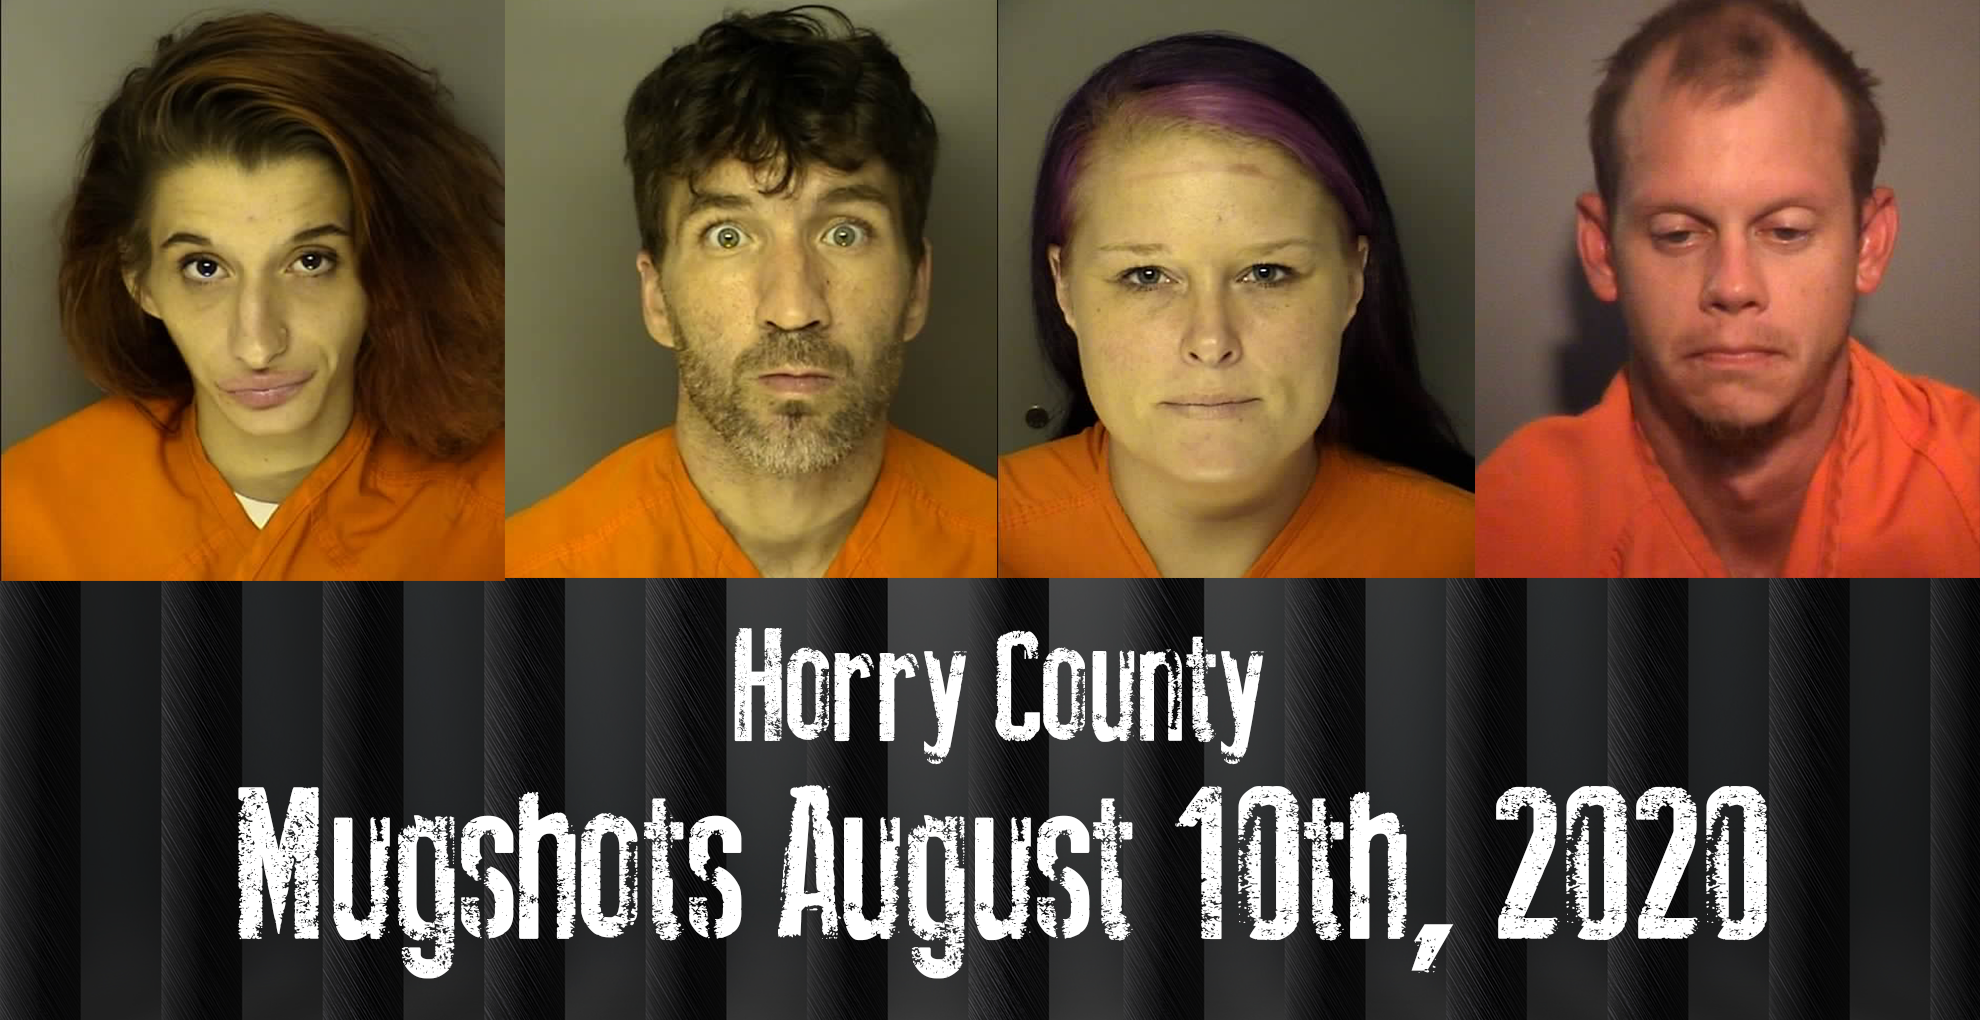 Prince William County Mugshots 2020 / Arrests In Brevard County